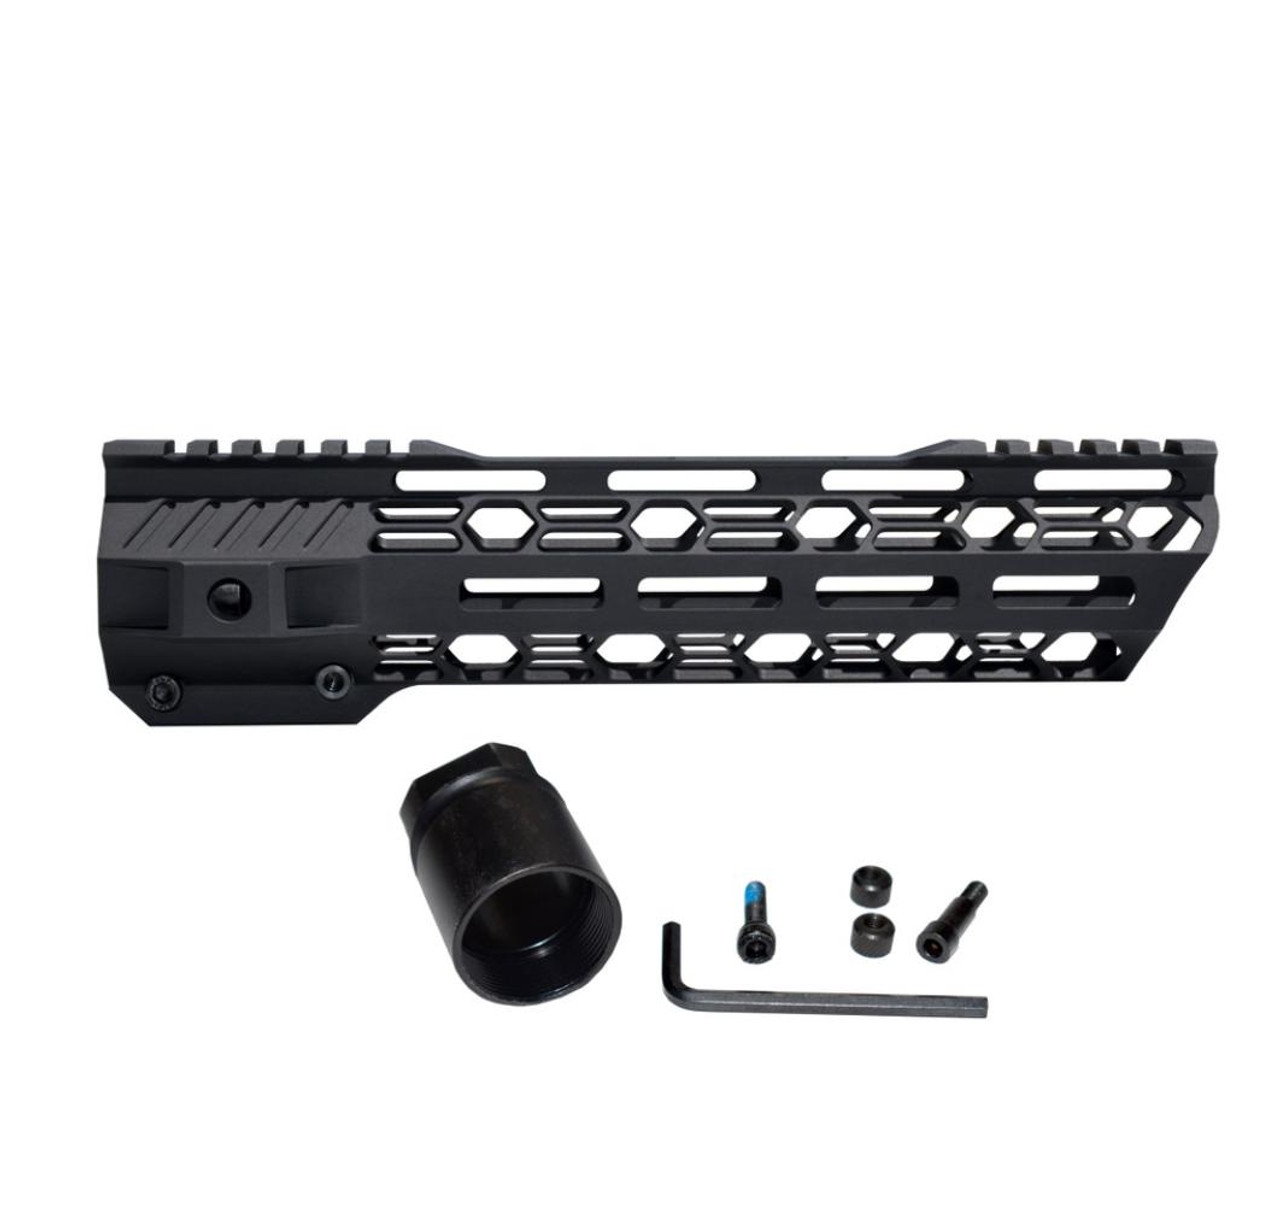 MCS 10" Super Light Free Float M-LOK Handguard with Partial Top Rail, LR 308 DMPS High Profile Made in the USA 